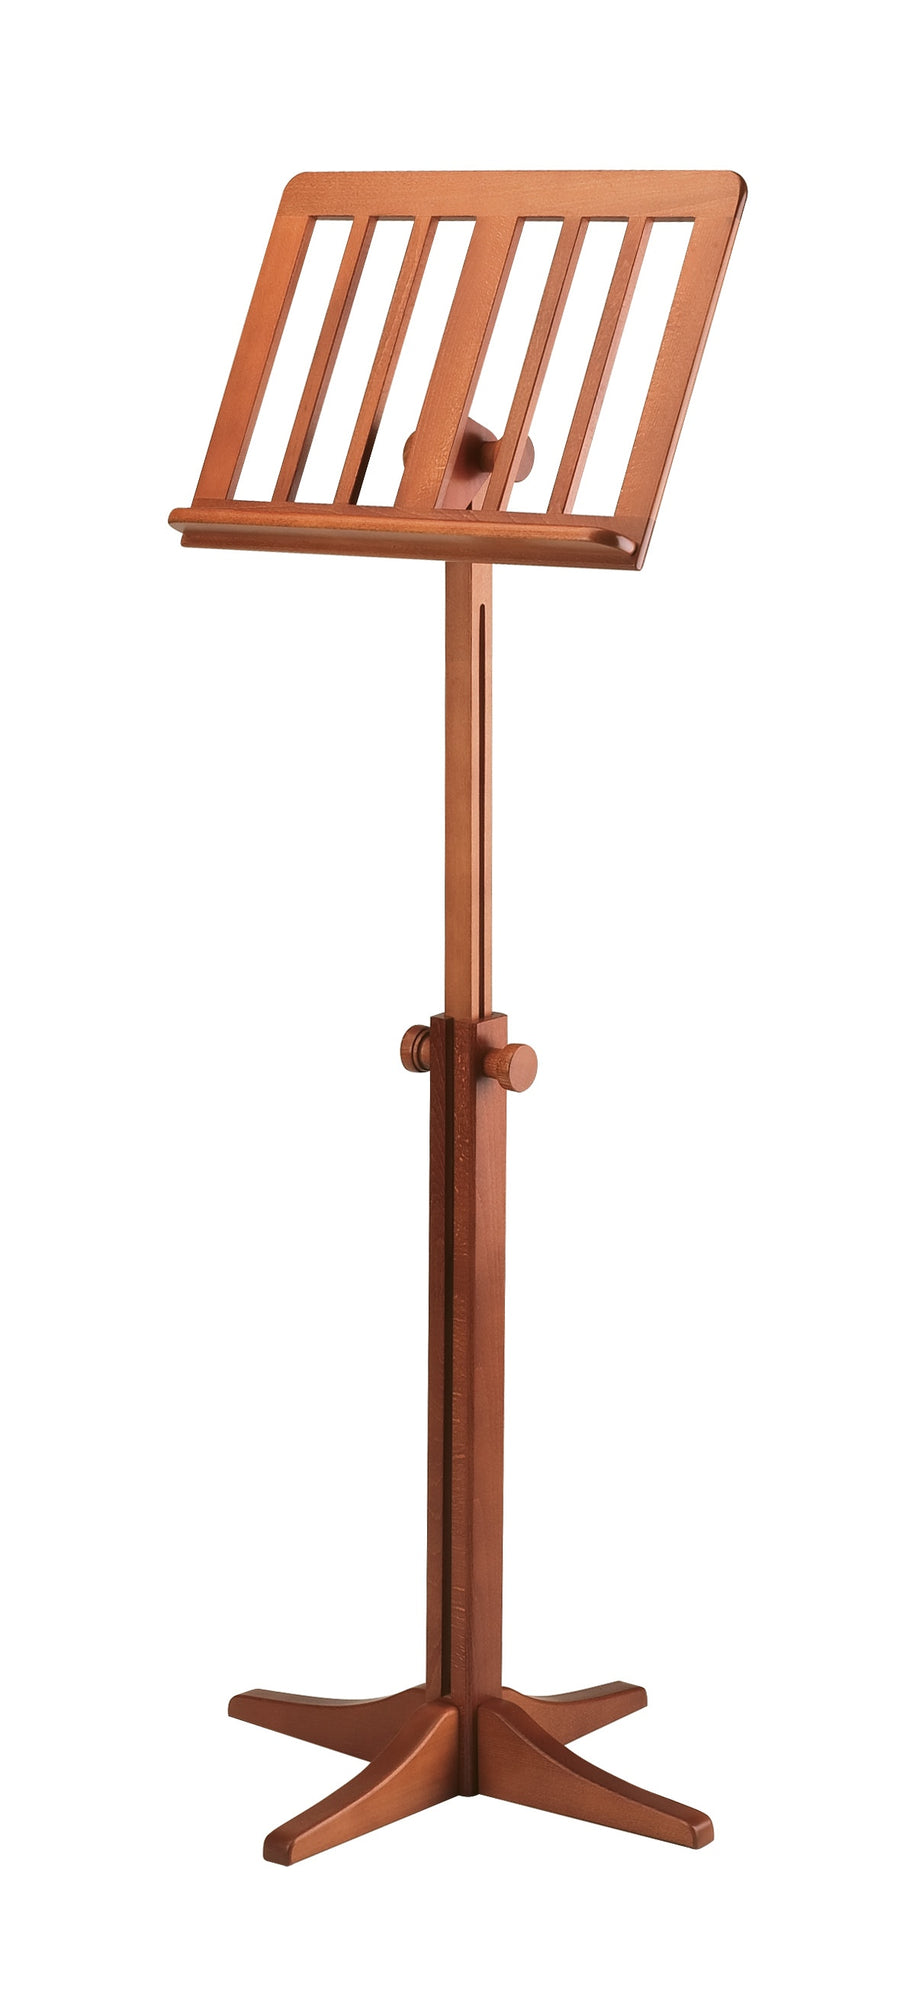 K & M 116/1 Wooden music stand